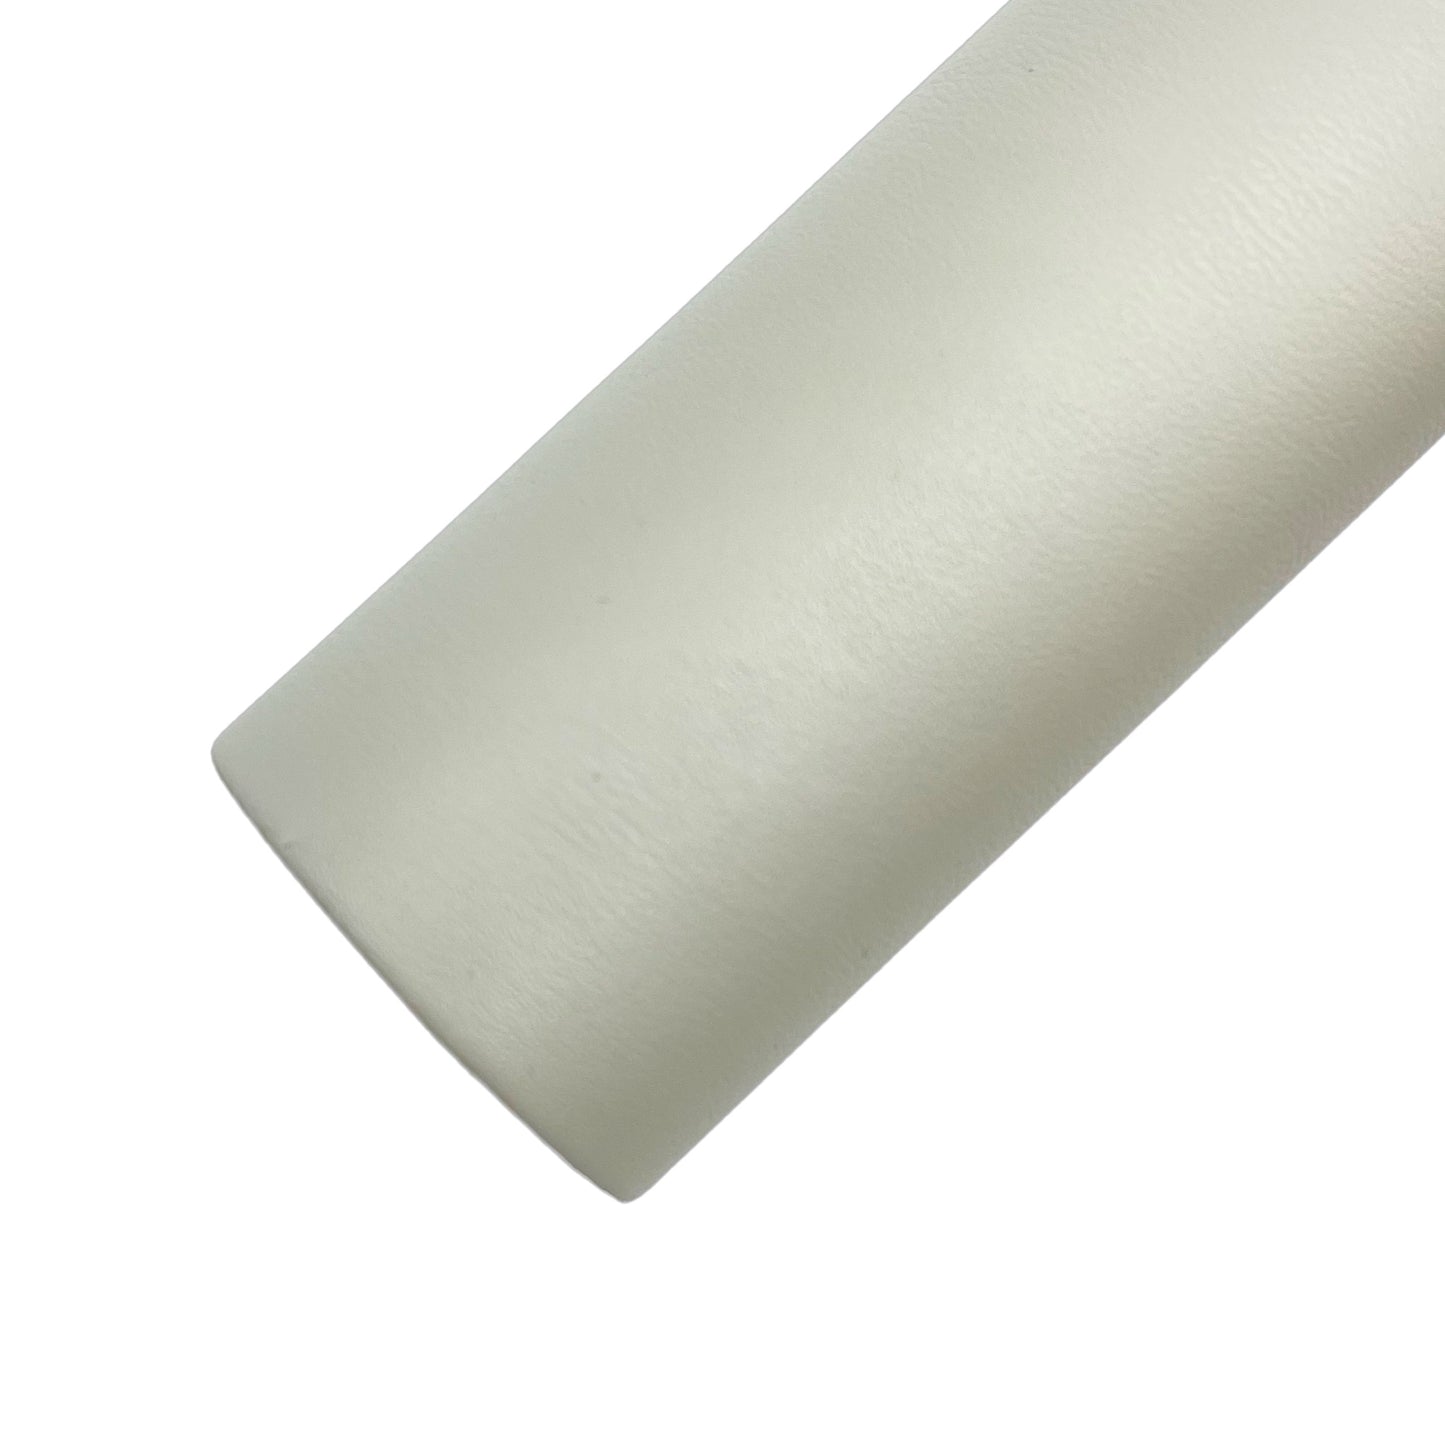 Rolled stone white smooth faux leather sheet.